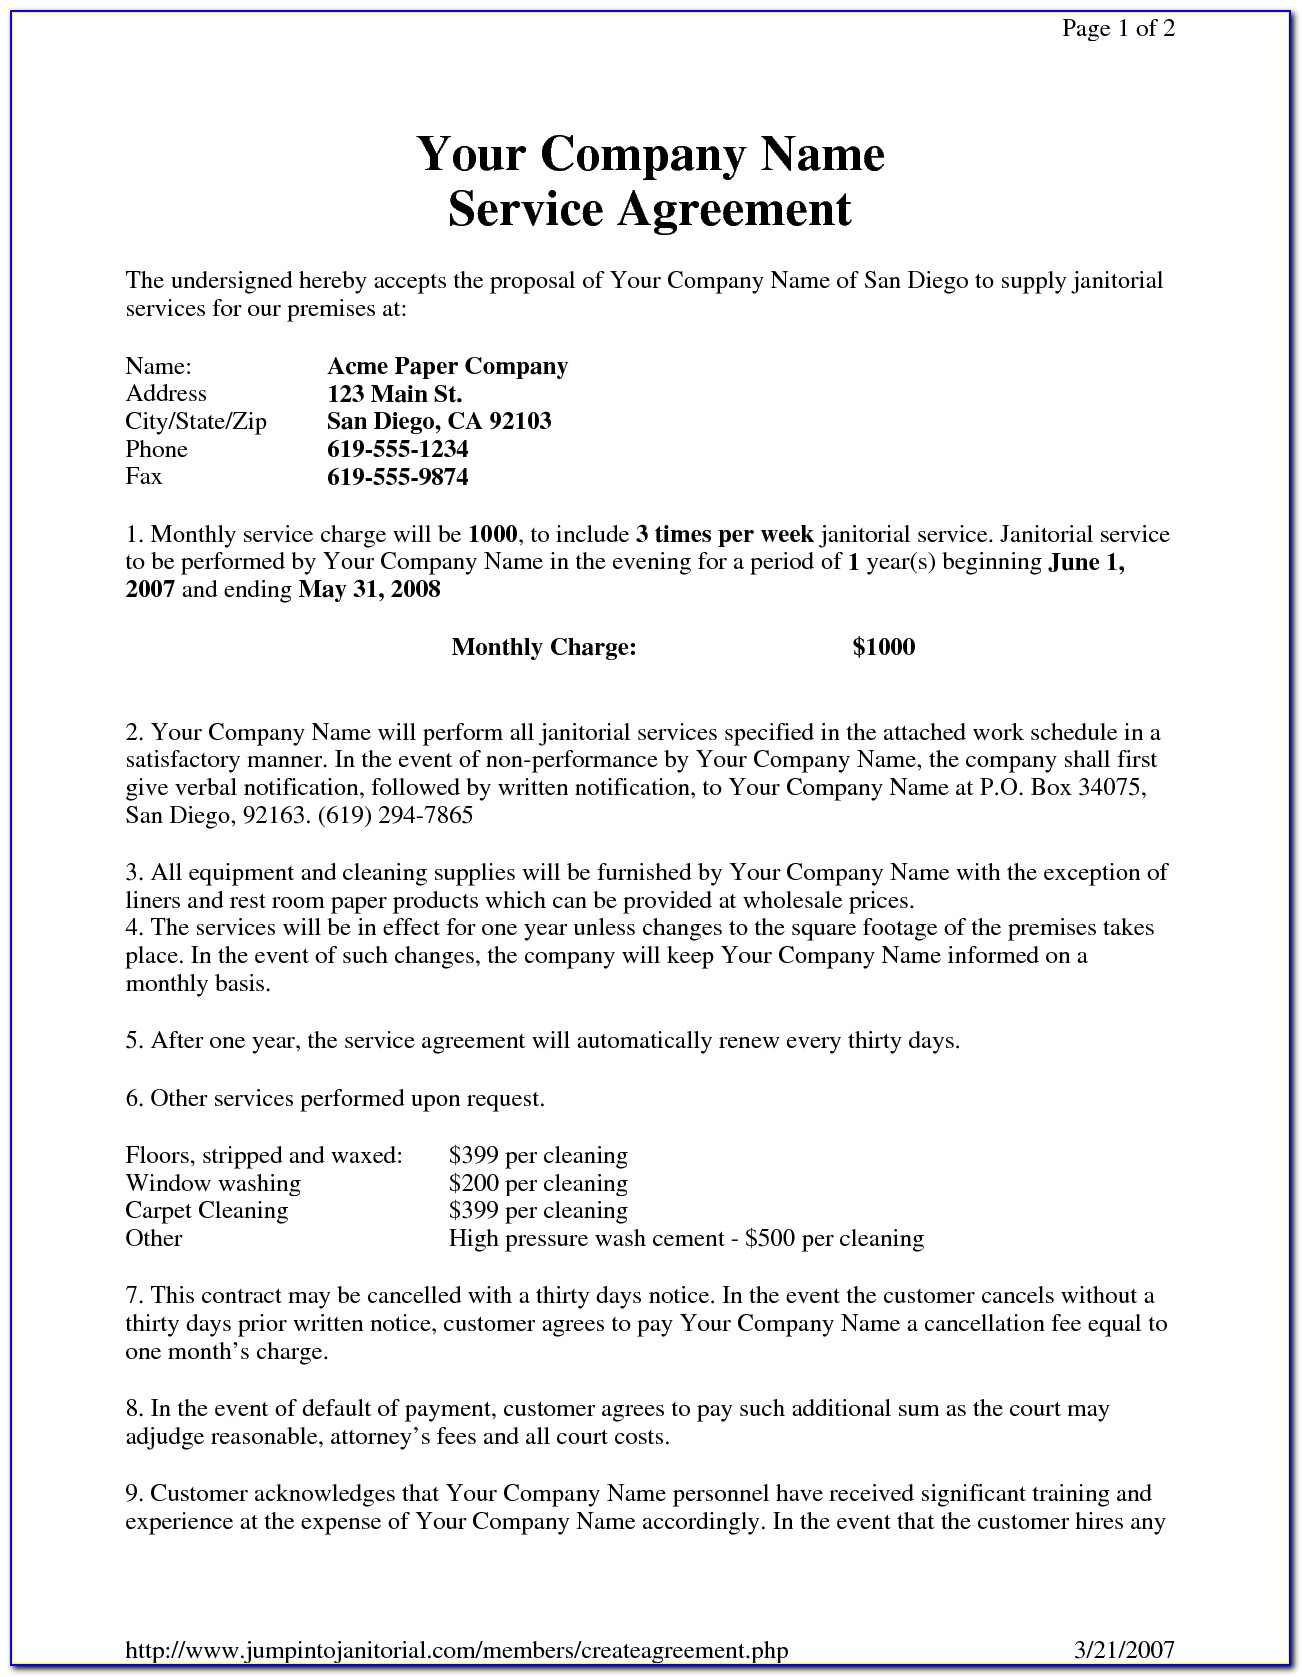 Sample Contract For Independent Contractors